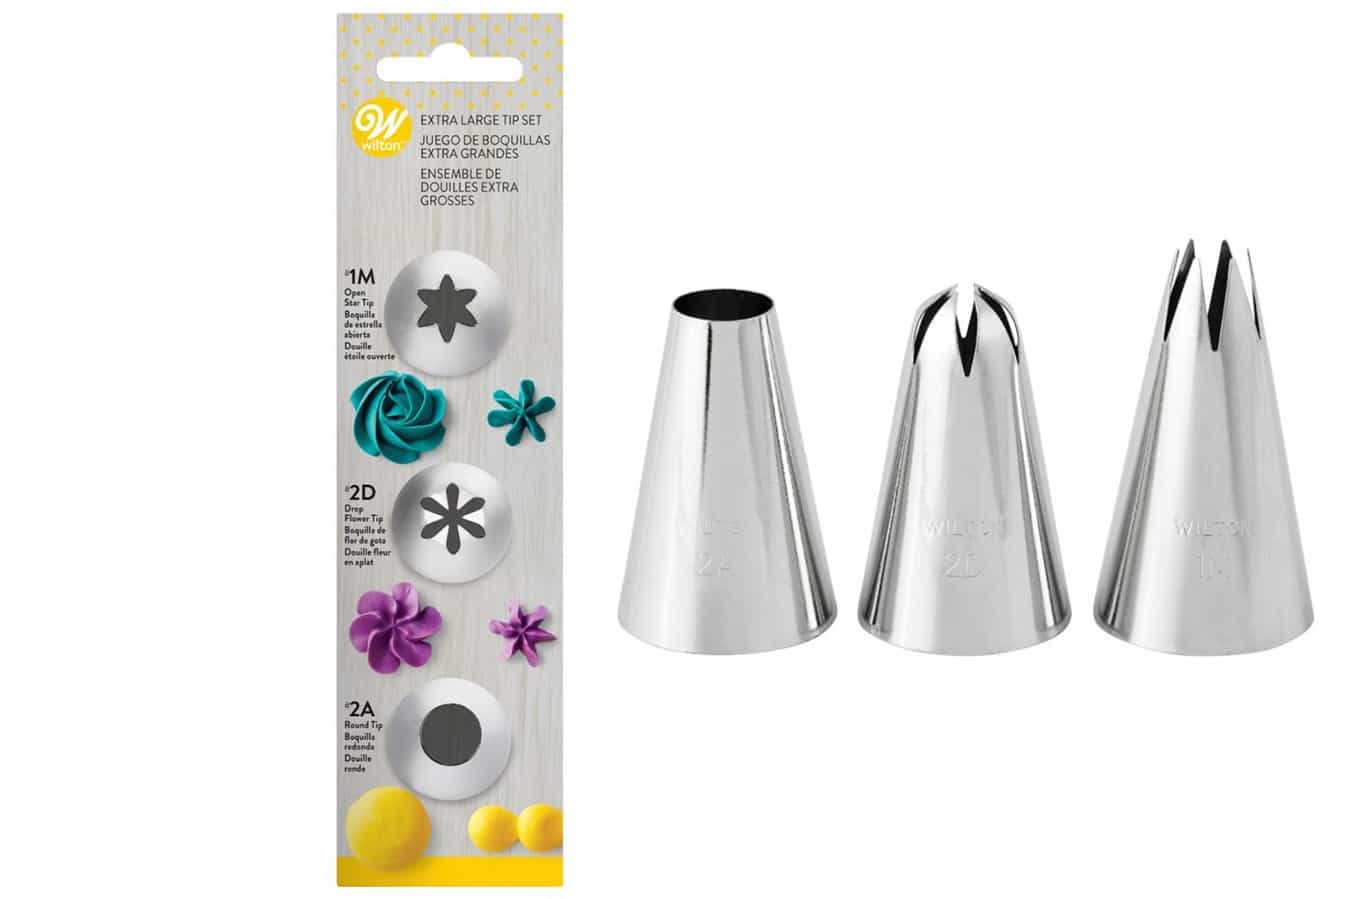 Wilton Stainless Steel Open Star Decorating Tip #1M (3-Pack)